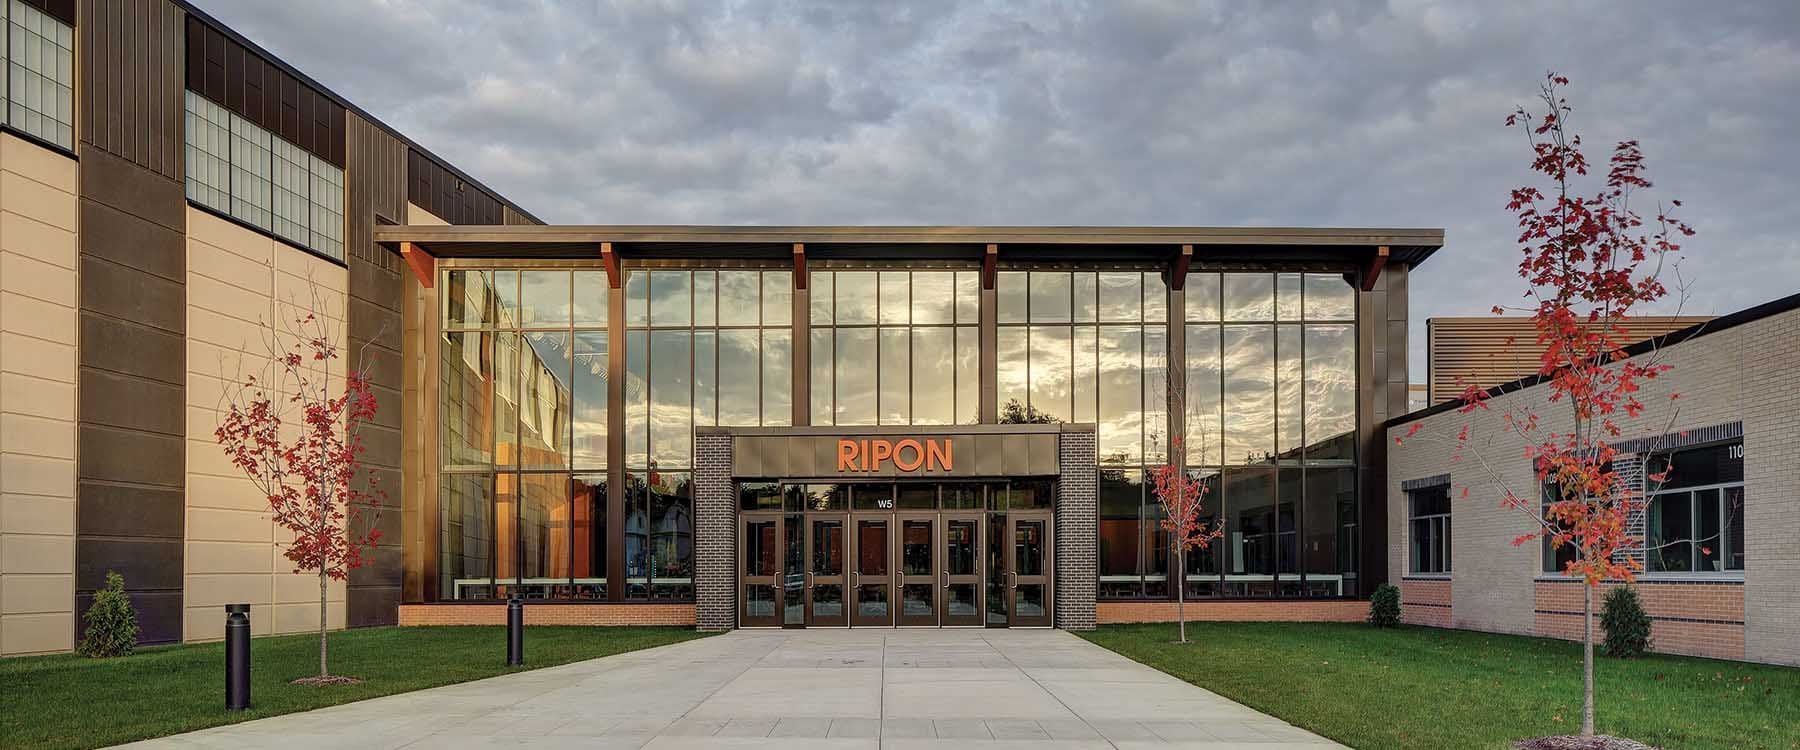 Ripon Middle High School District